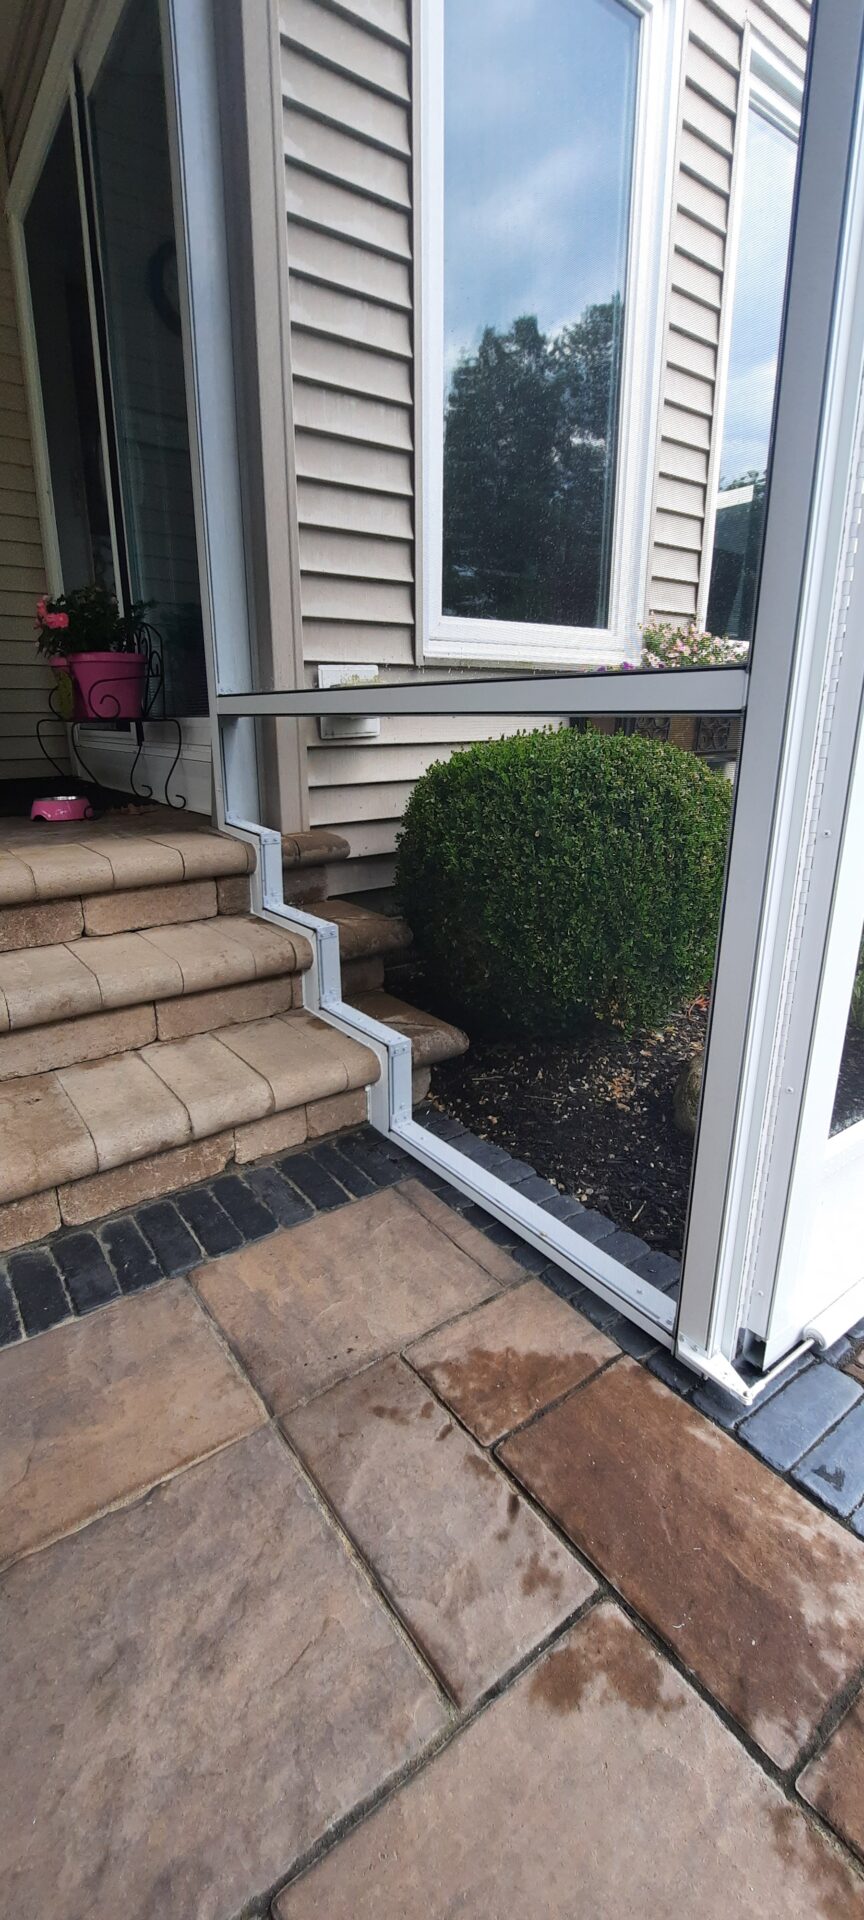 Screening Solutions Ohio uses custom permanent screening to enclose an outdoor patio in Northeast Ohio. The custom screen frame is recessed and shaped around the stone steps.